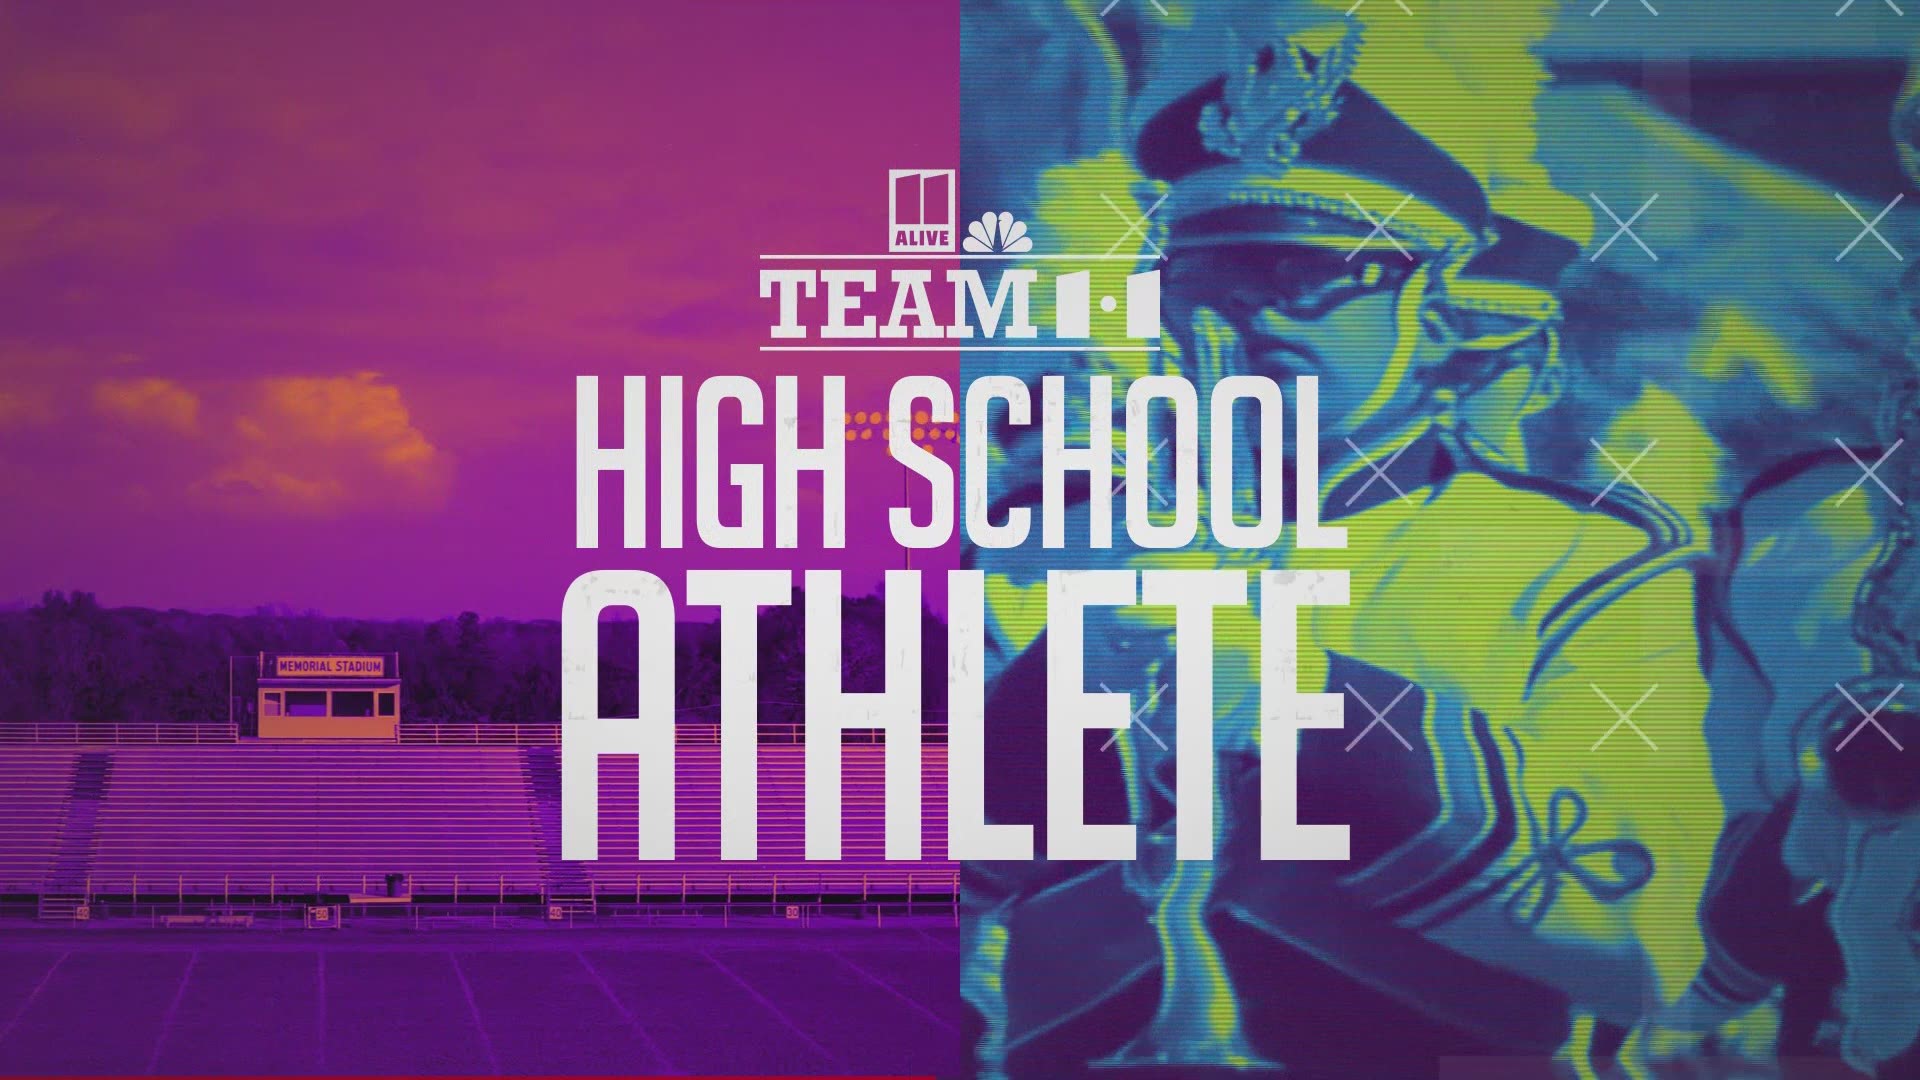 These are the nominees for the Outstanding Team11 High School Athlete award.